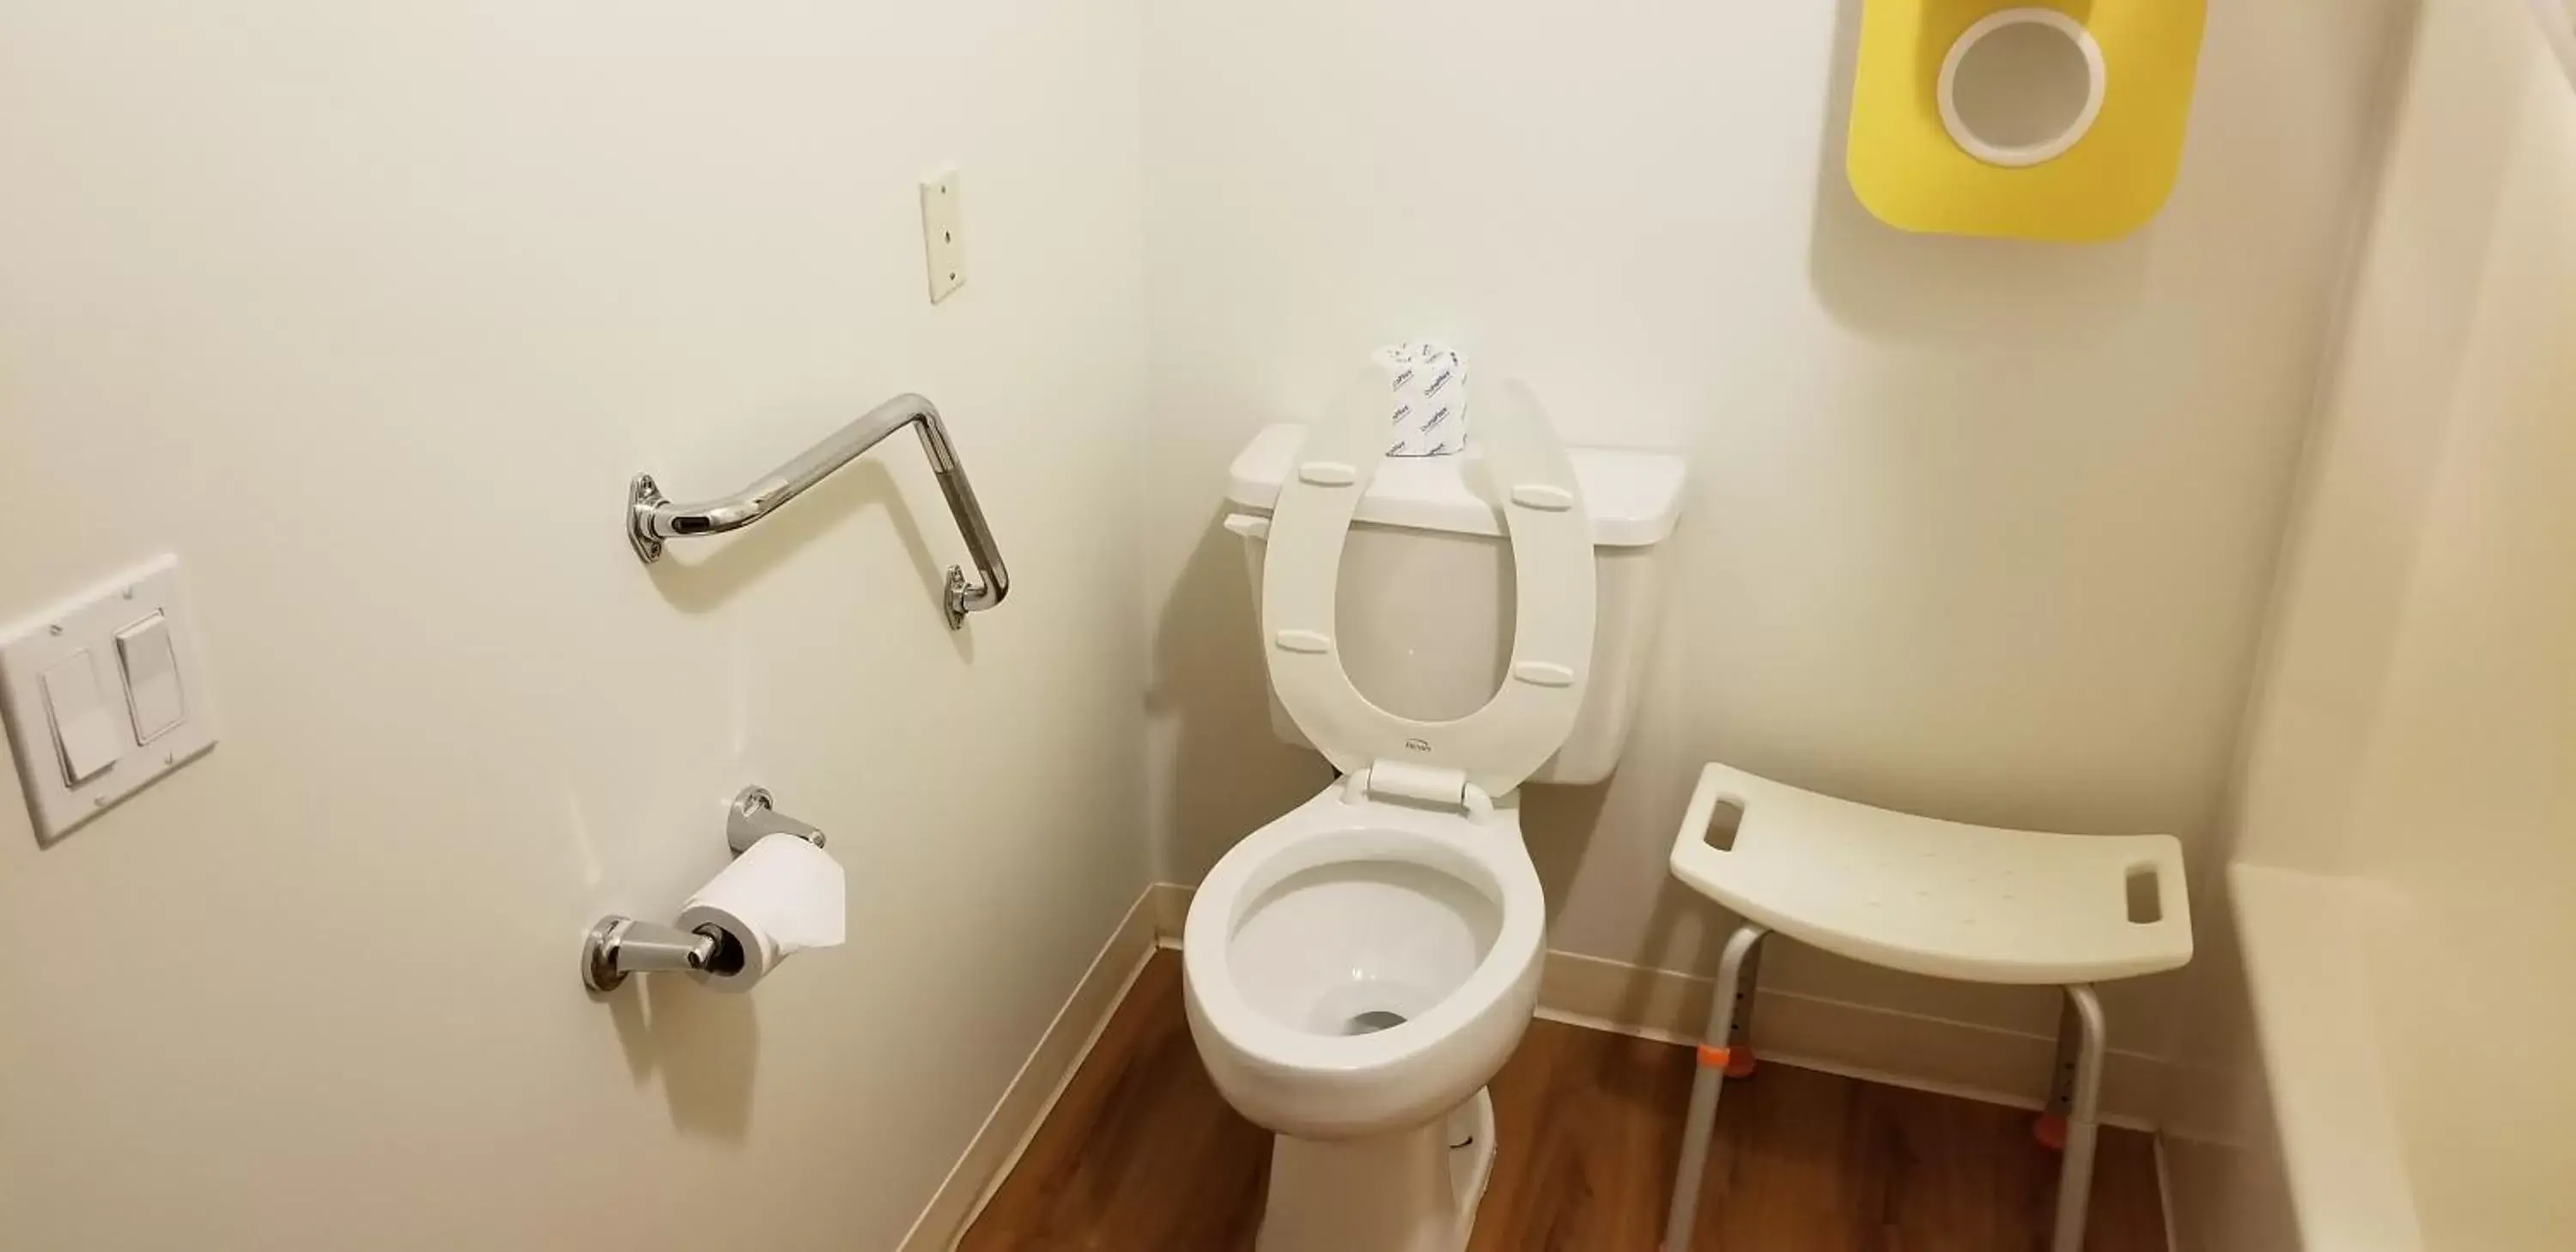 Facility for disabled guests, Bathroom in Motel 6-Innisfail, AB